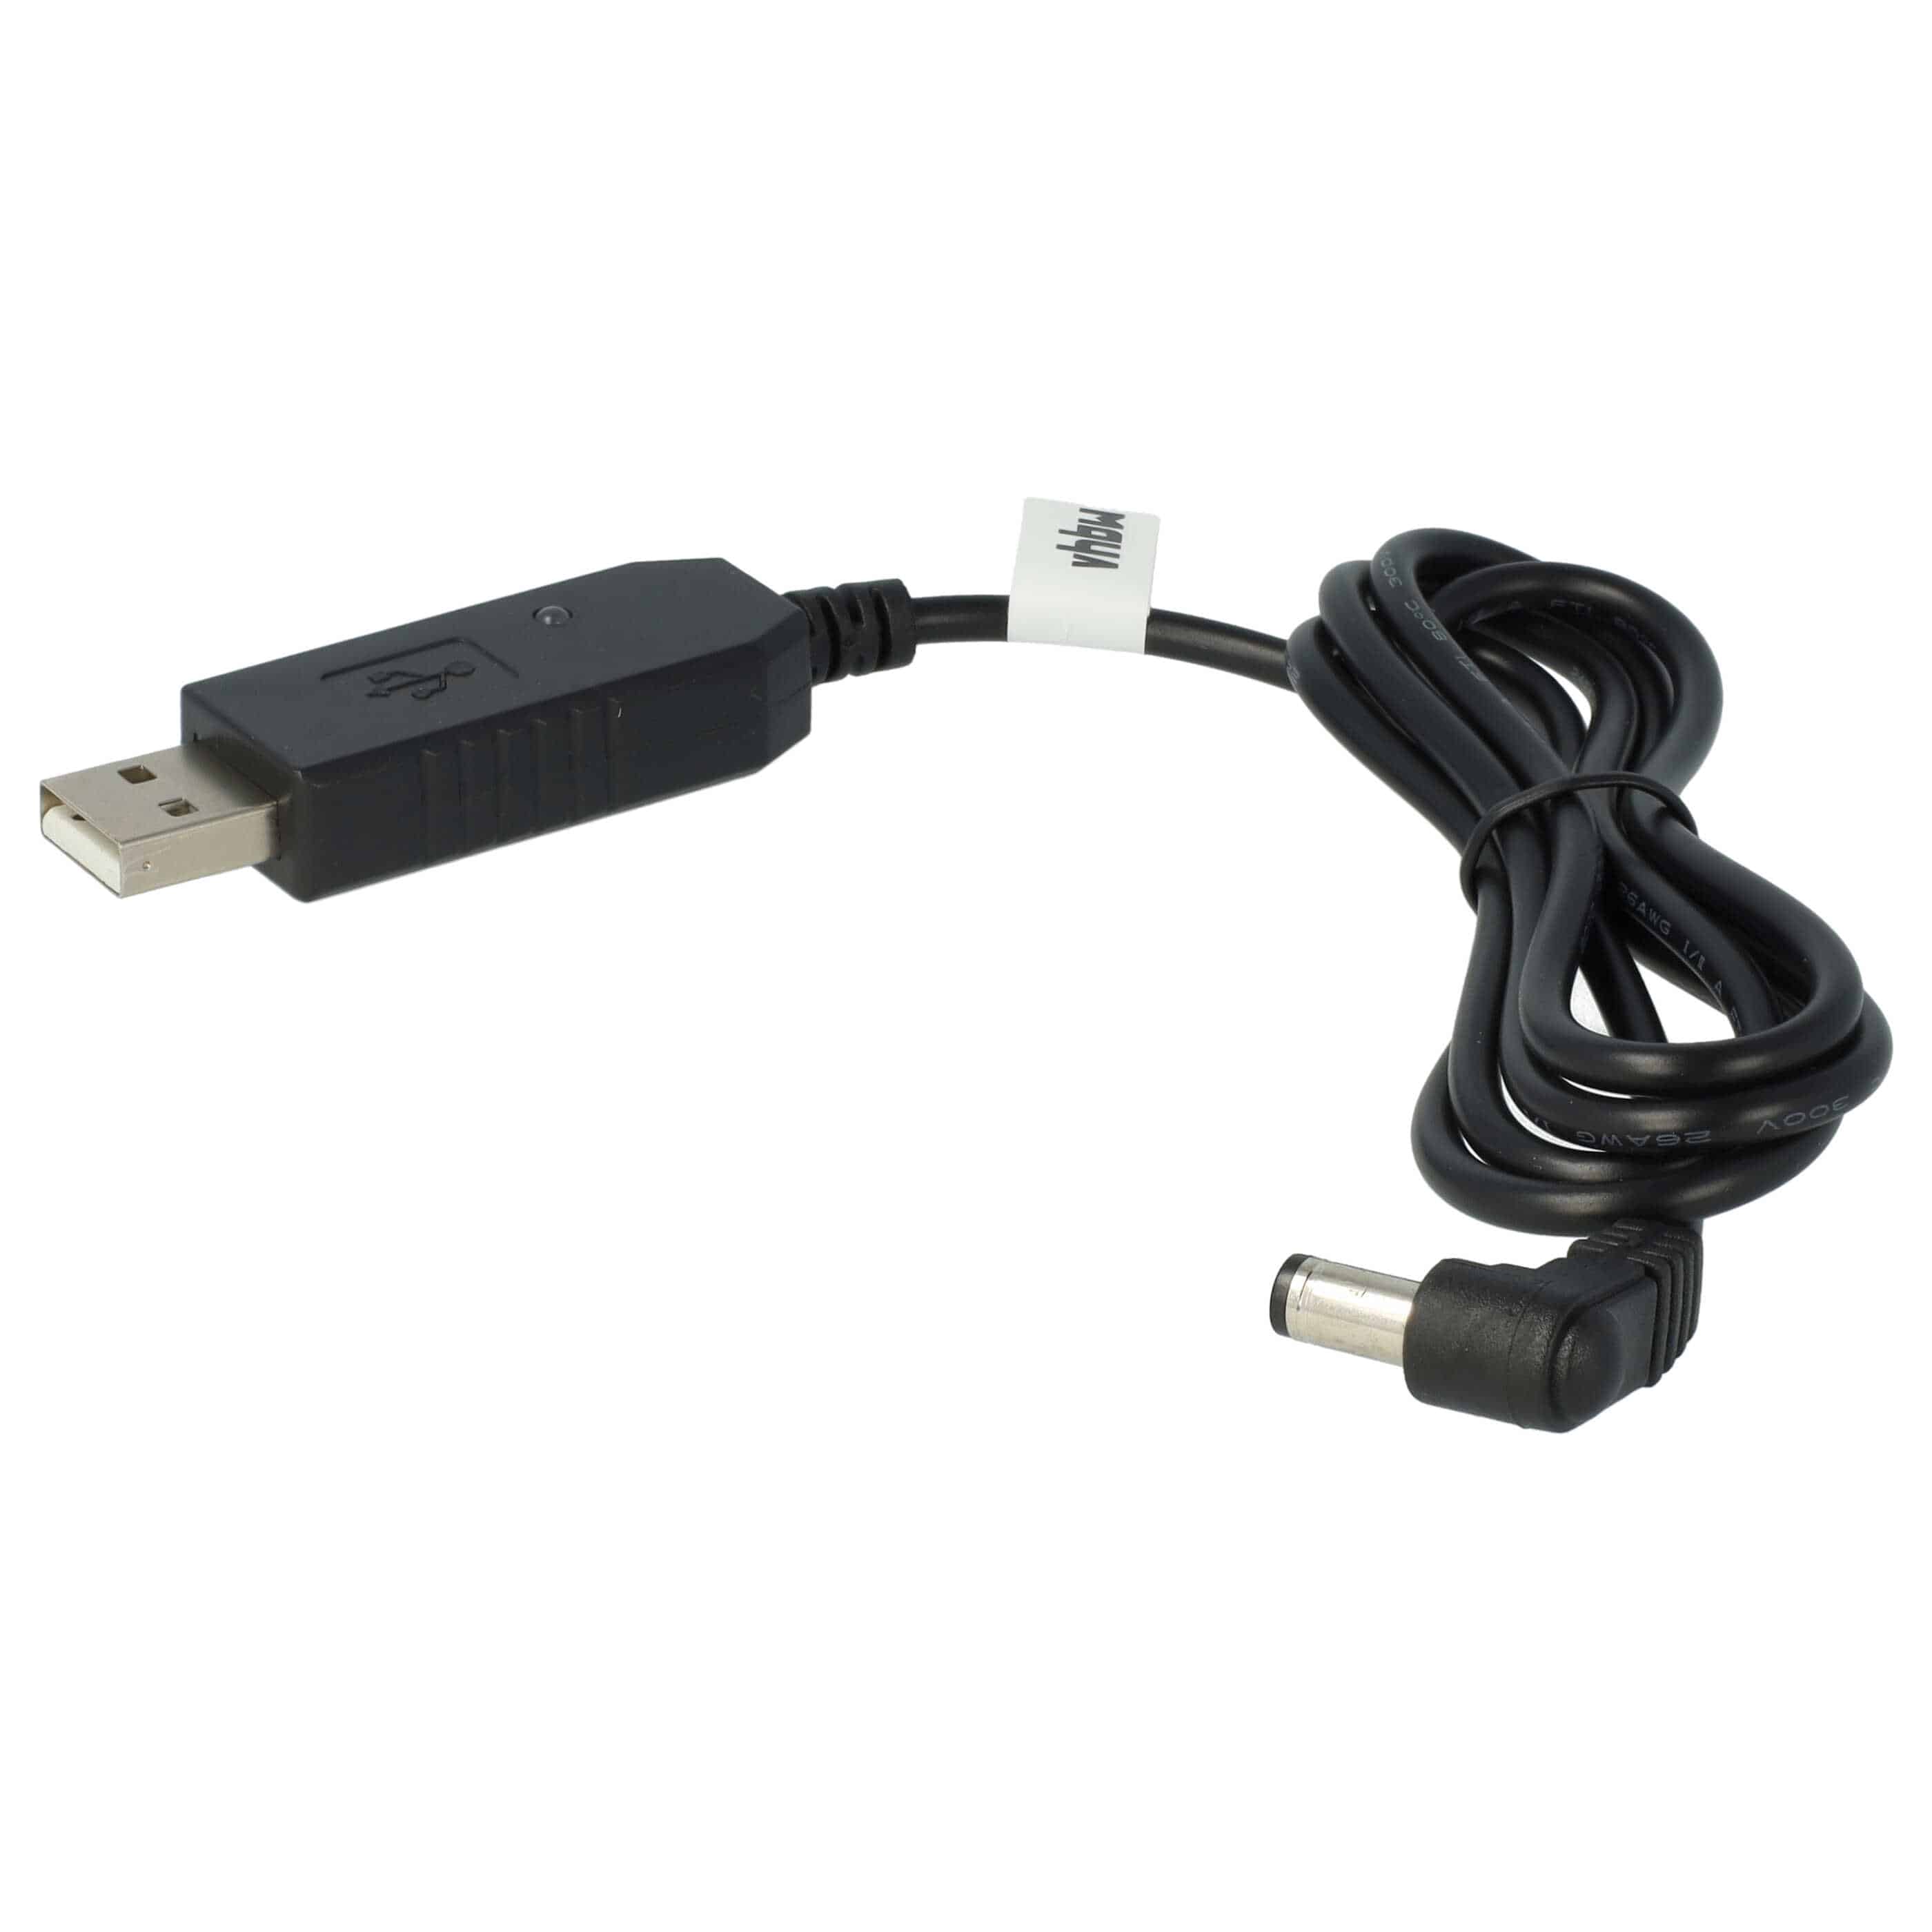 USB Charging Cable suitable for Baofeng UV-B5 Walkie Talkie, Two Way Radio Batteries - 100 cm